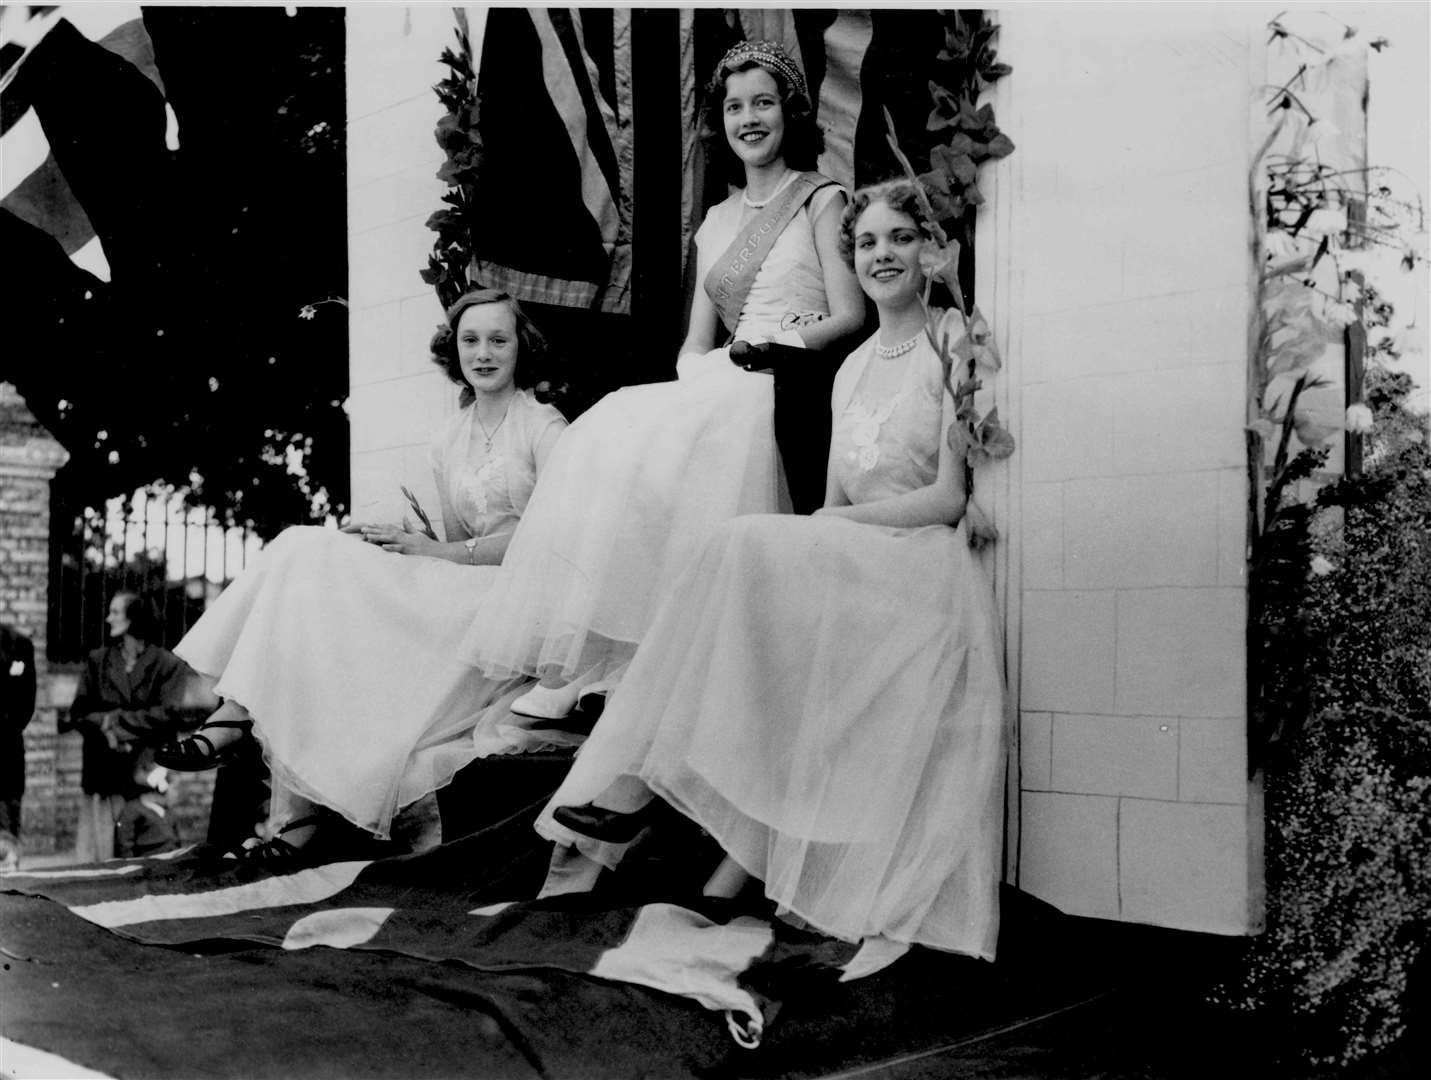 Miss Canterbury, 17-year-old Pauline Groombridge, on her carnival float in August 1954 with Maids of Honour Barbara Farrow, 16, and Shirley Mears, 16